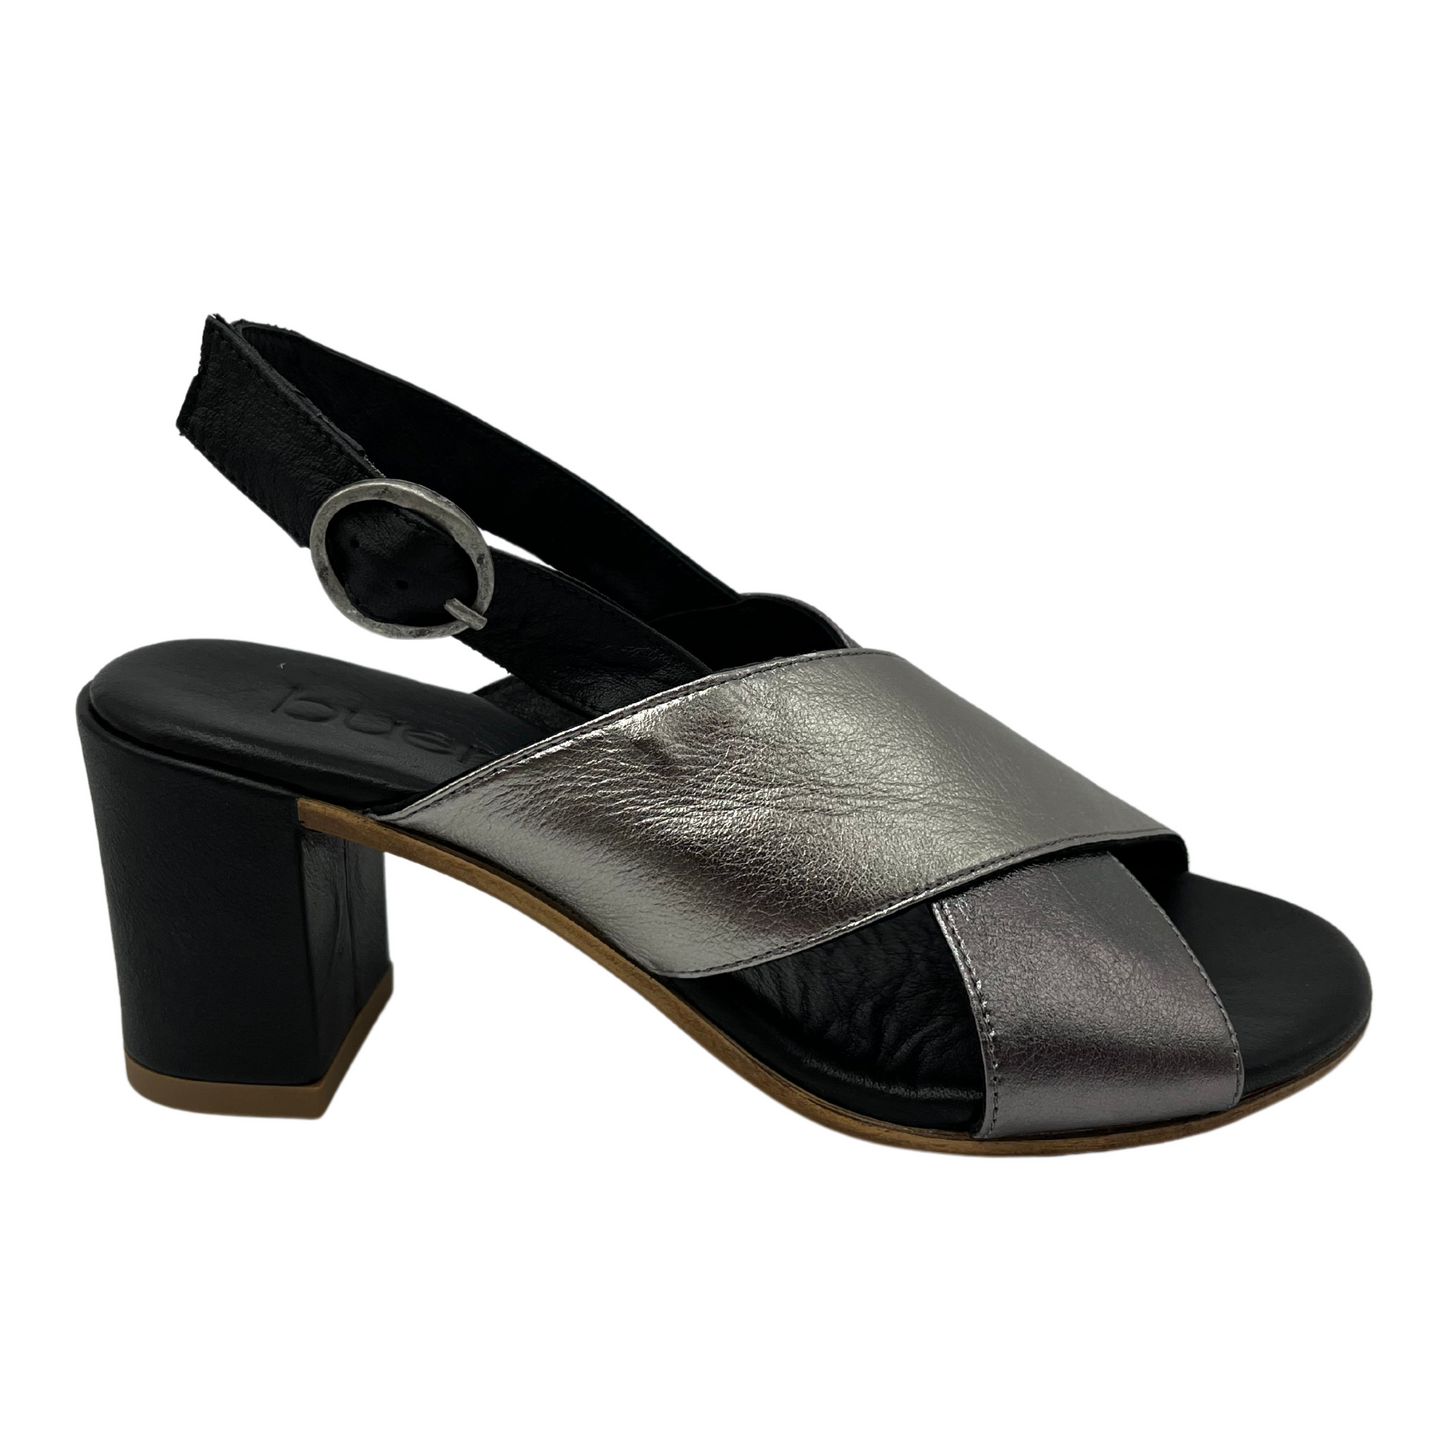 Right facing view of black and silver sandal with block heel and slingback strap